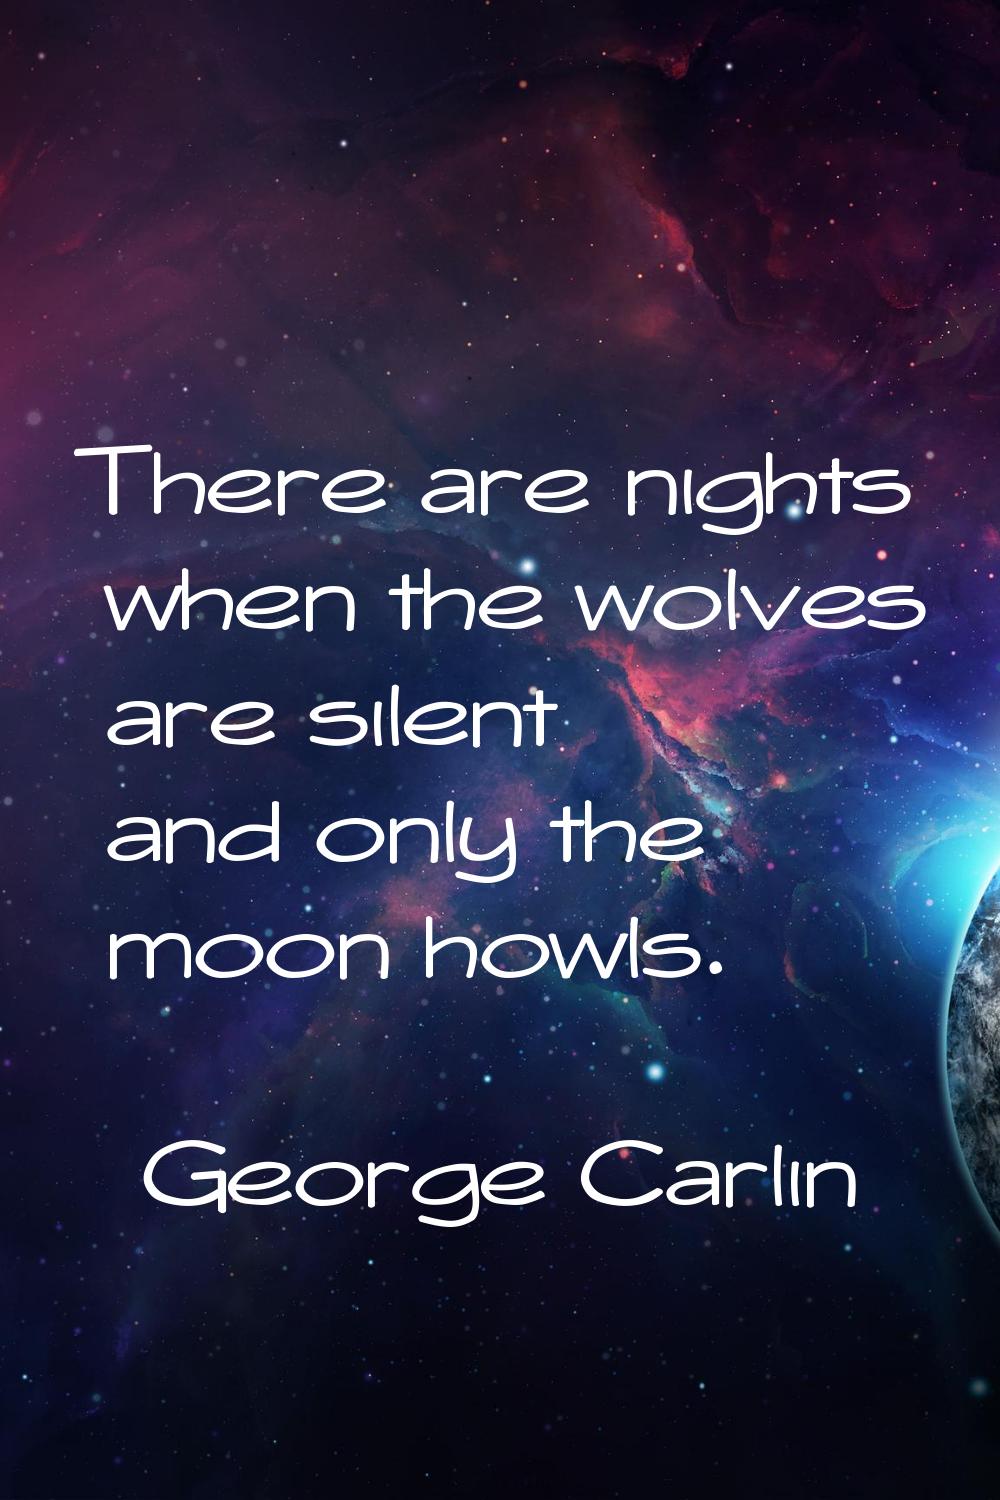 There are nights when the wolves are silent and only the moon howls.